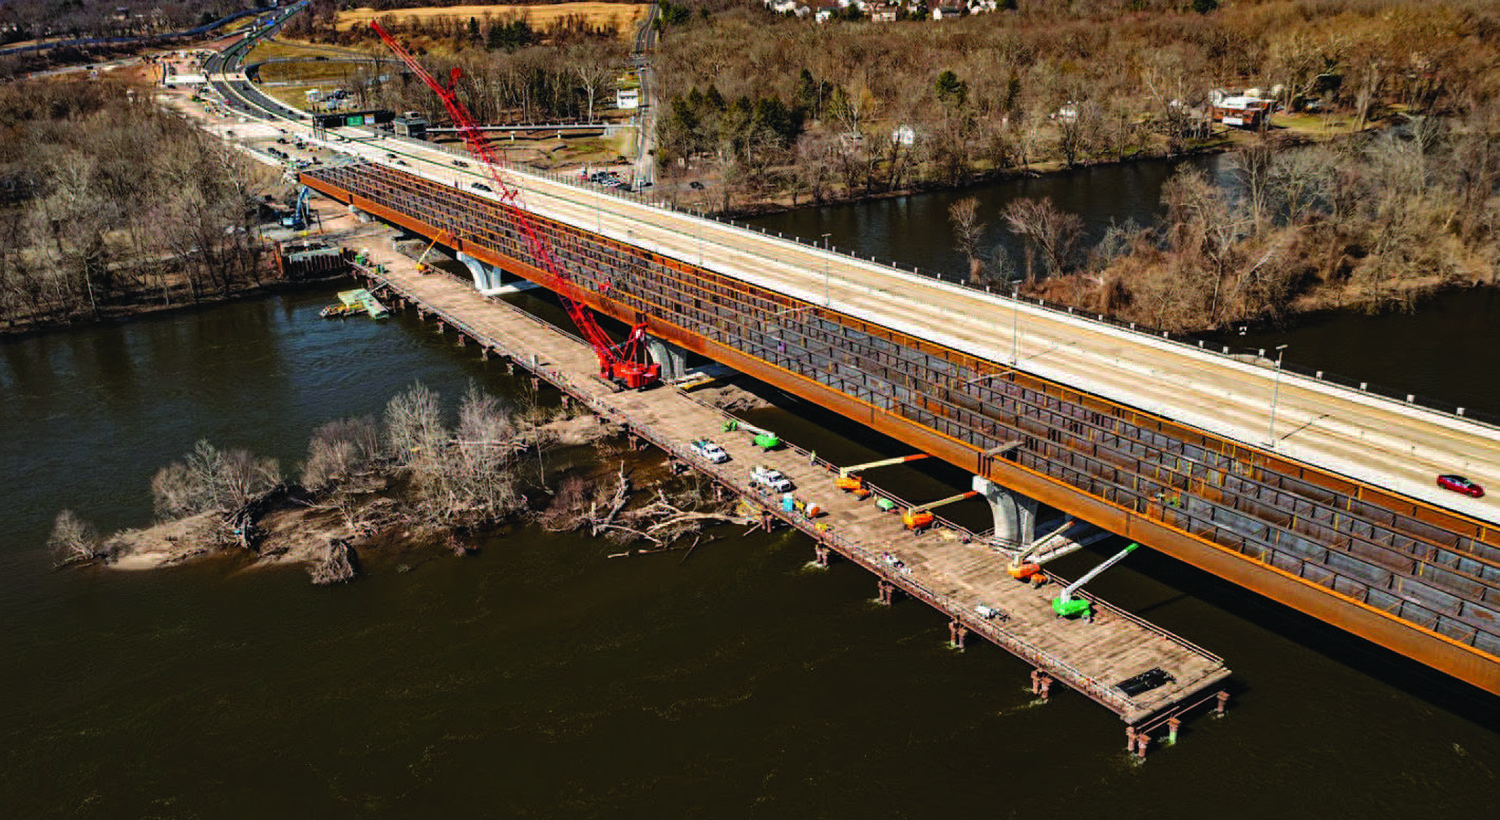 The Scudder Falls Bridge Replacement project along I-295 in New Jersey and Pennsylvania reached a major milestone March 16, when the last of 98 steel support girders was lifted and secured into place.